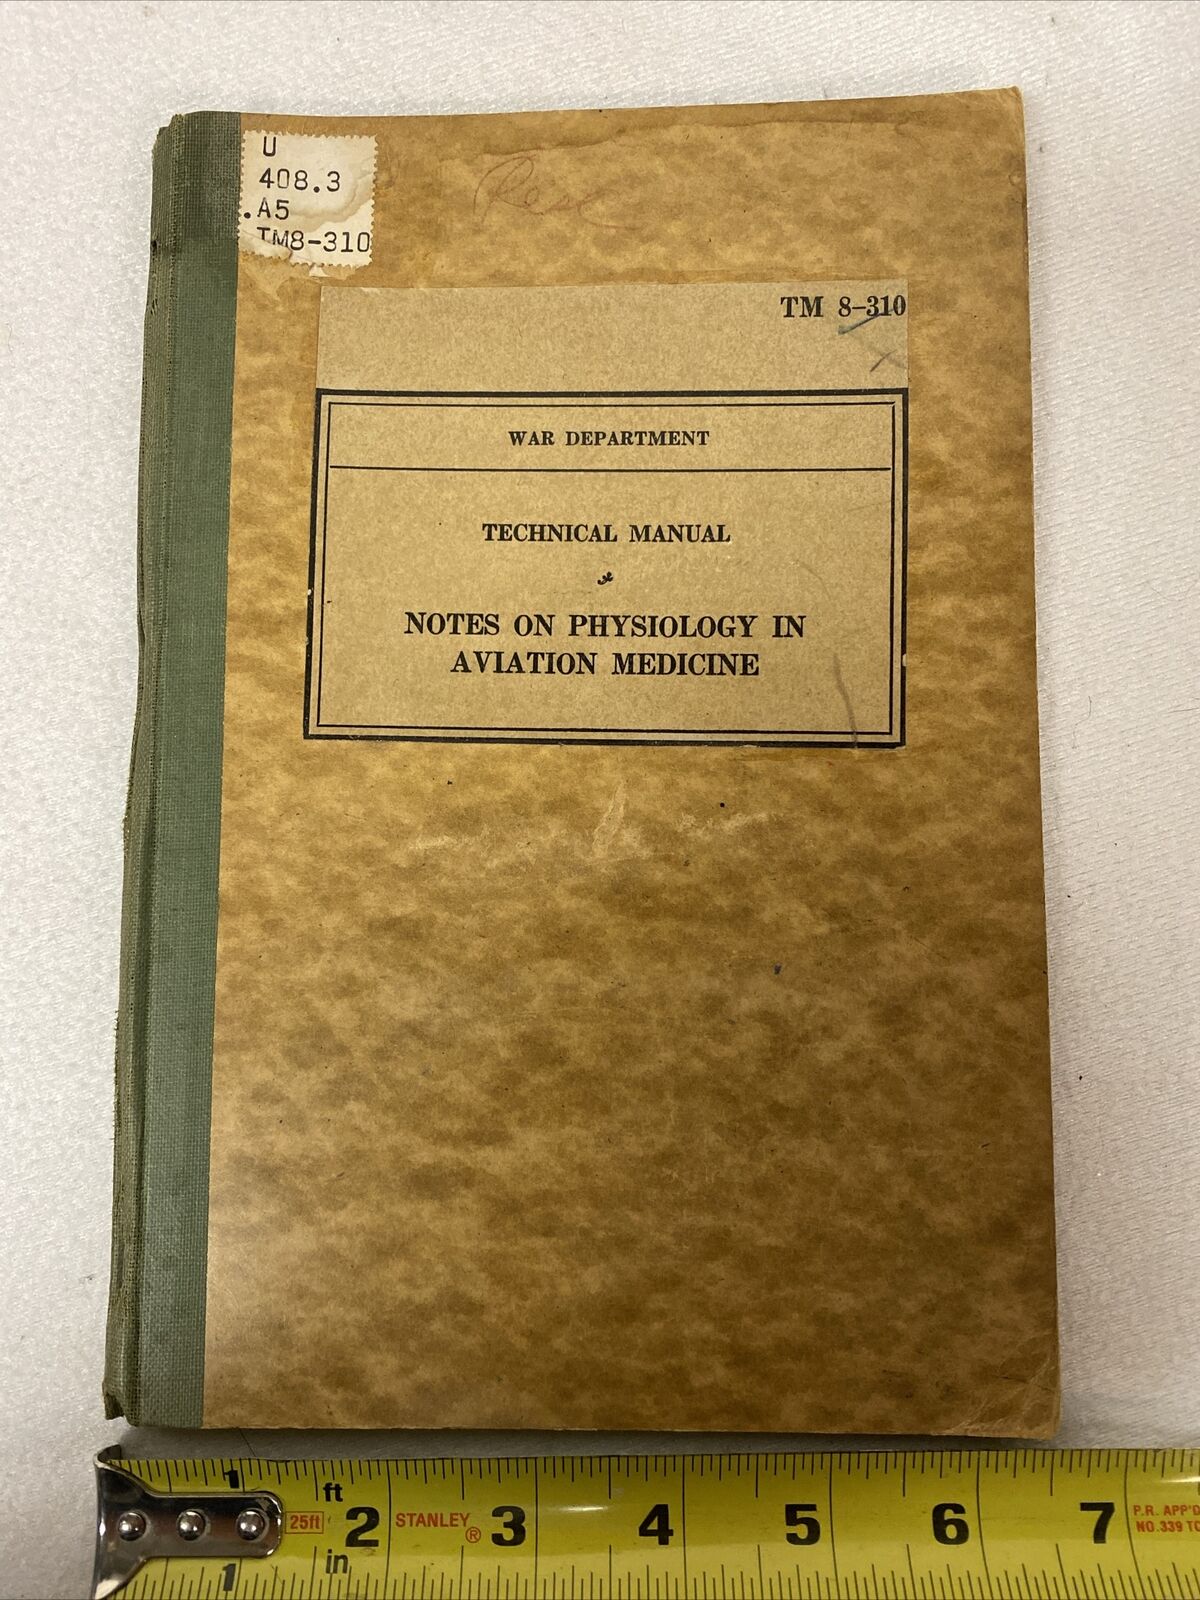 Original WWII TM 8-310 NOTES ON PHYSIOLOGY IN AVIATION MEDICINE 